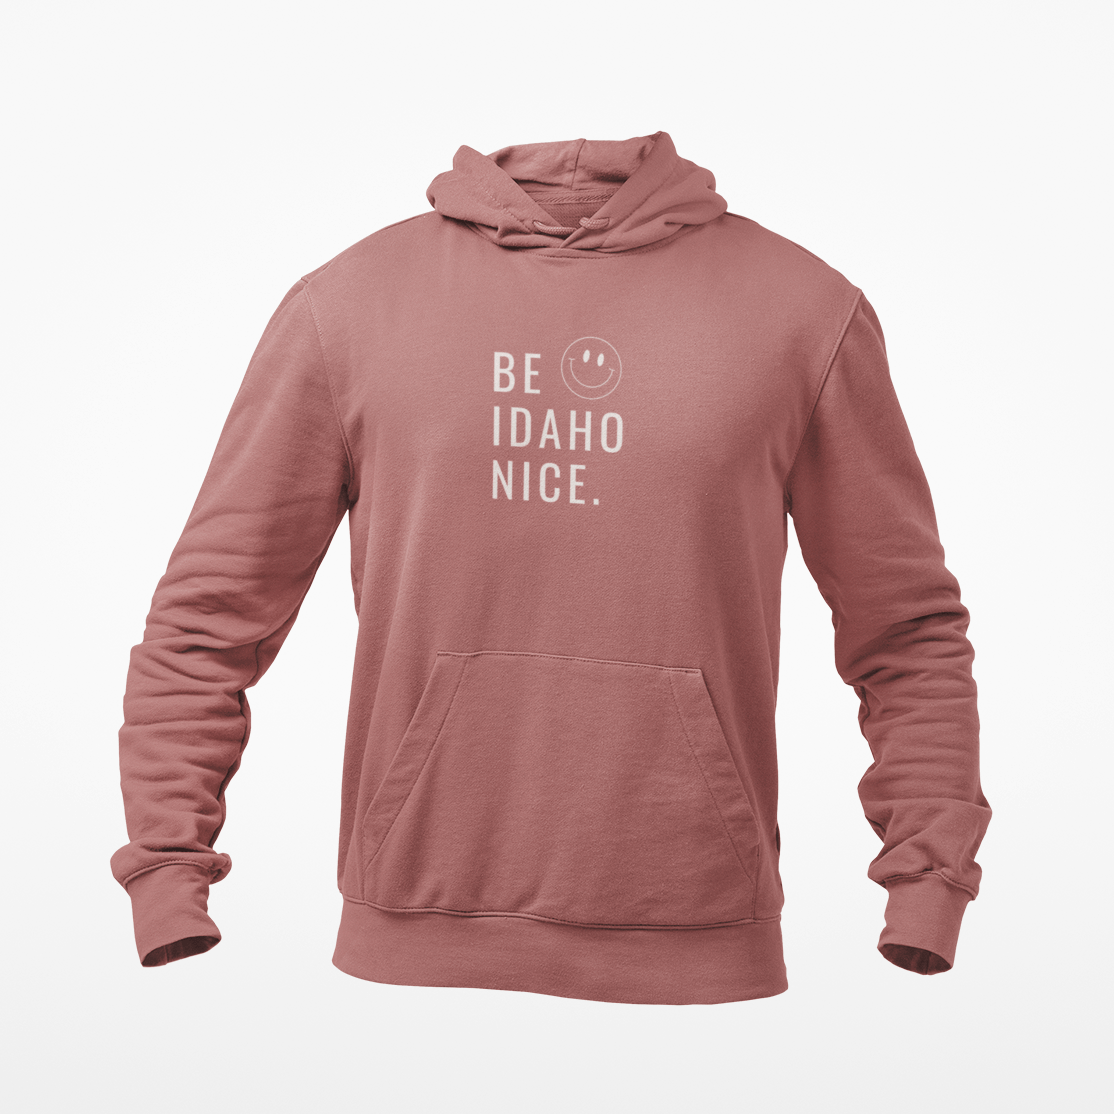 208 Supply Co Be Idaho Nice Unisex Midweight Youth Hoodie